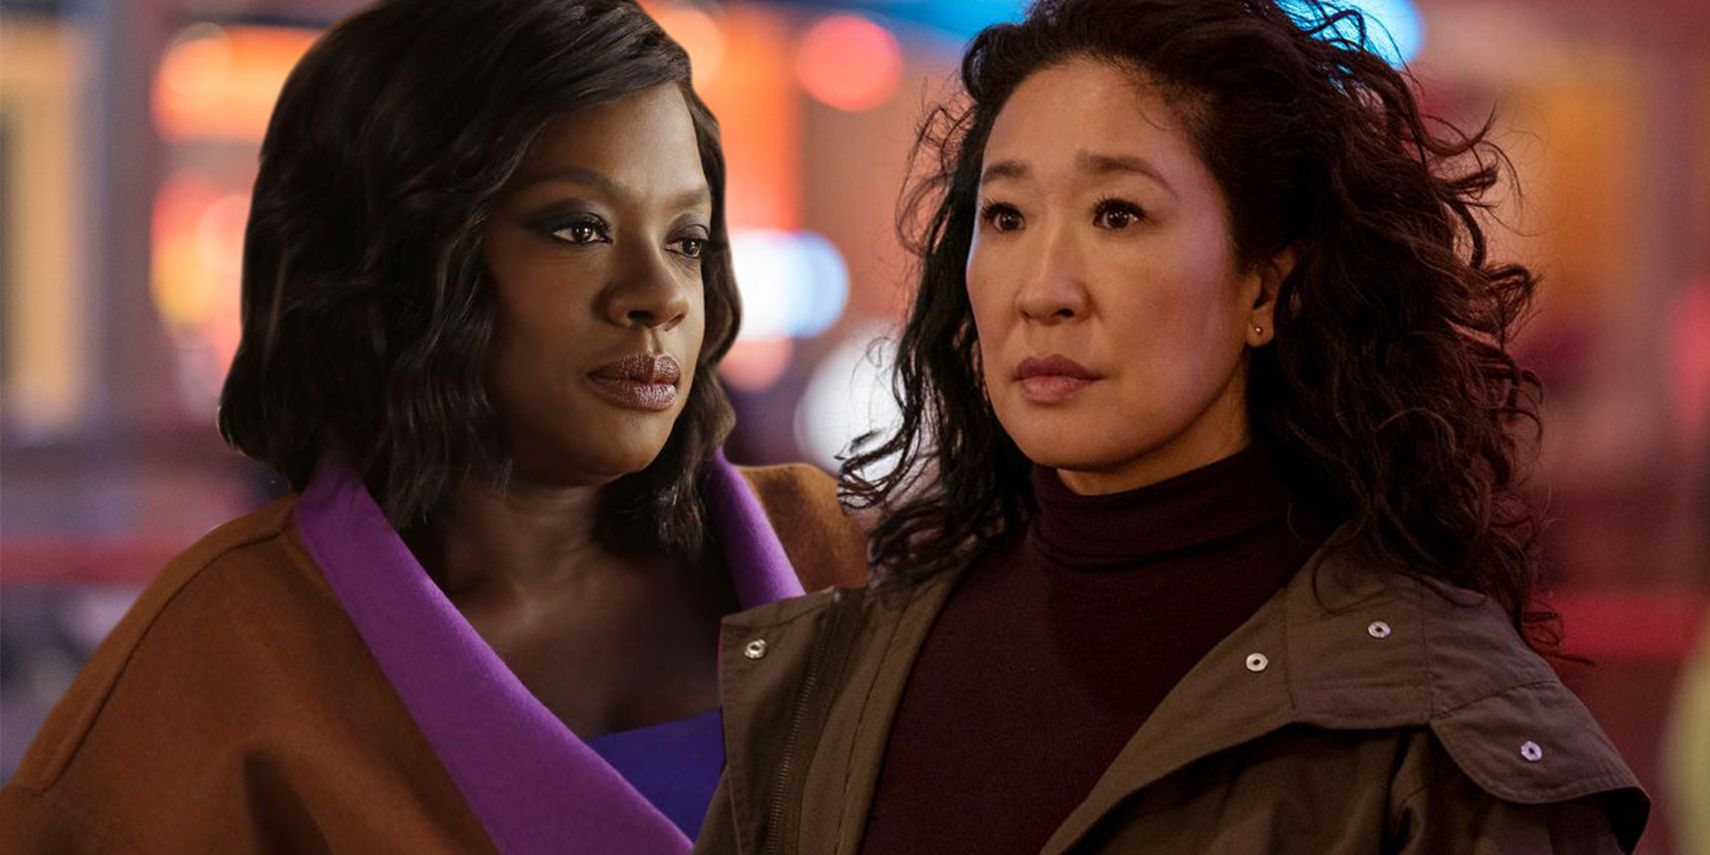 Top 15 Television Shows With Badass Female Leads Ranked (According To IMDb)